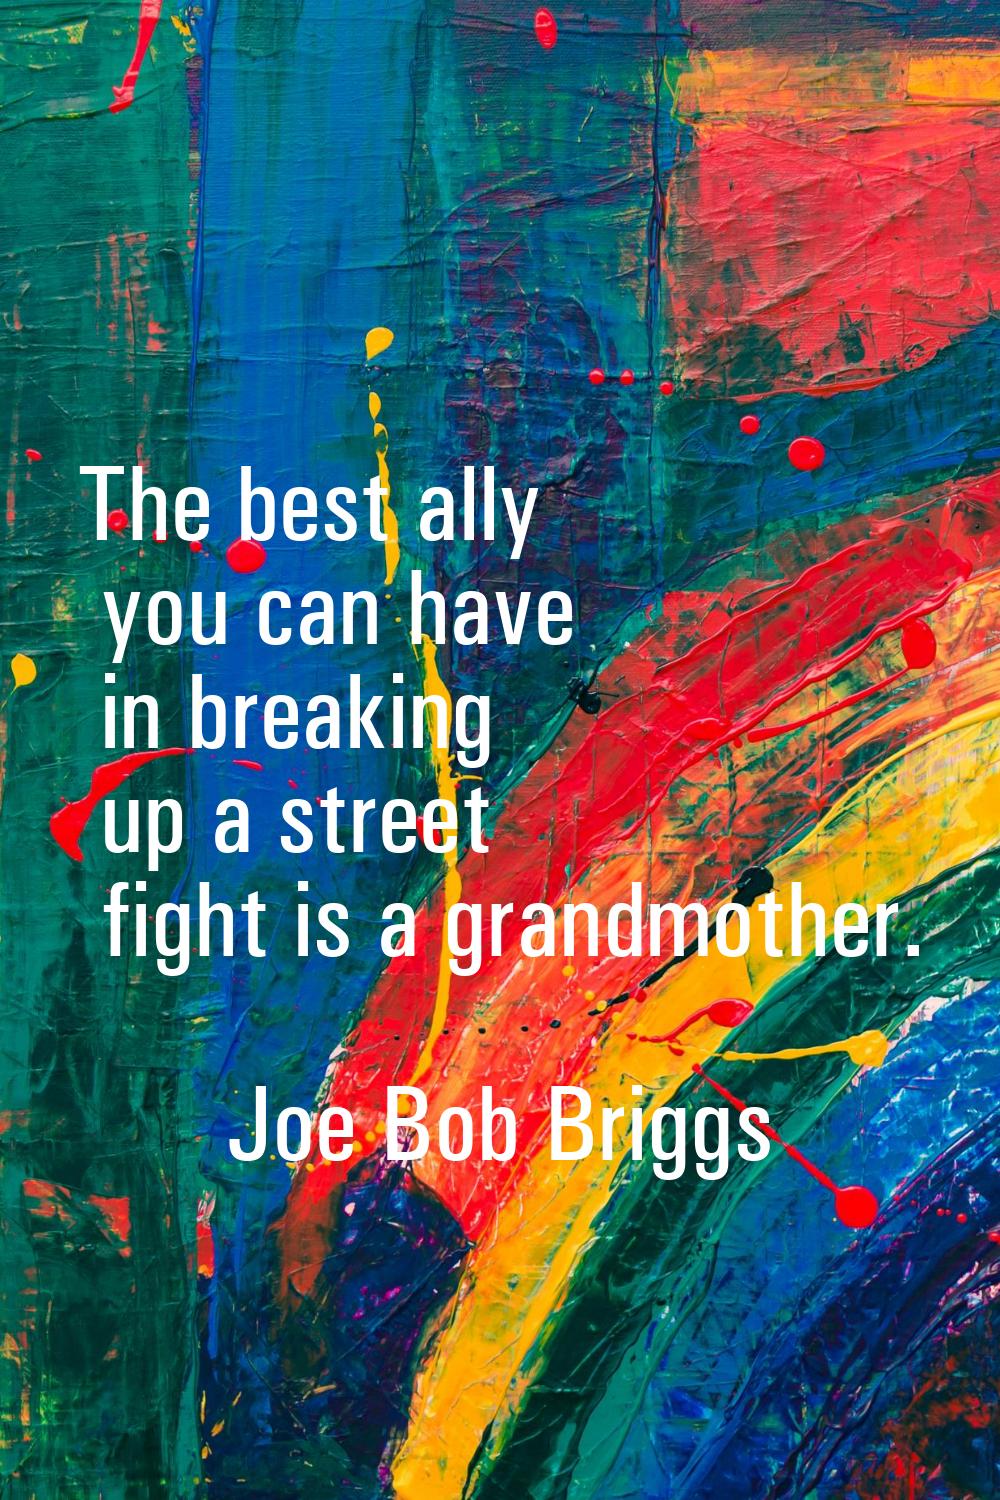 The best ally you can have in breaking up a street fight is a grandmother.